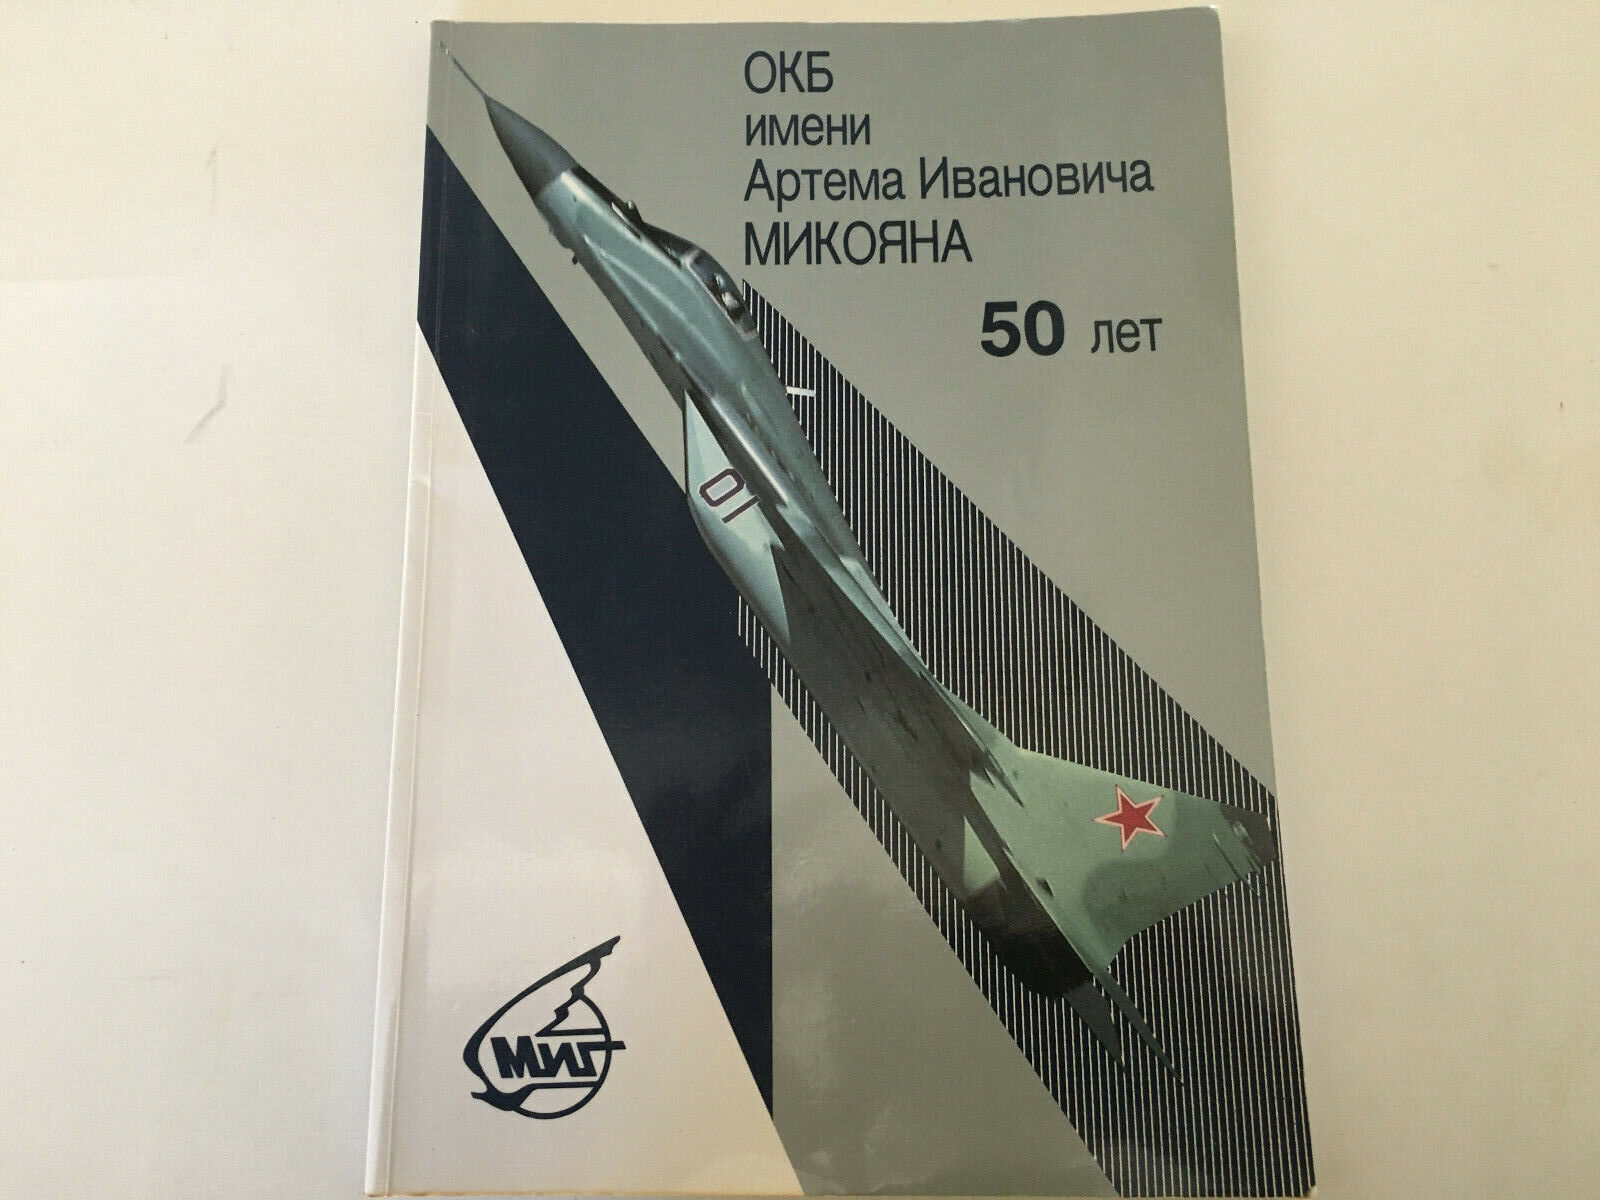 Mikoyan (MIG) 50th Anniversary Publilication Signed by Mikoyan\'s Chief Designer